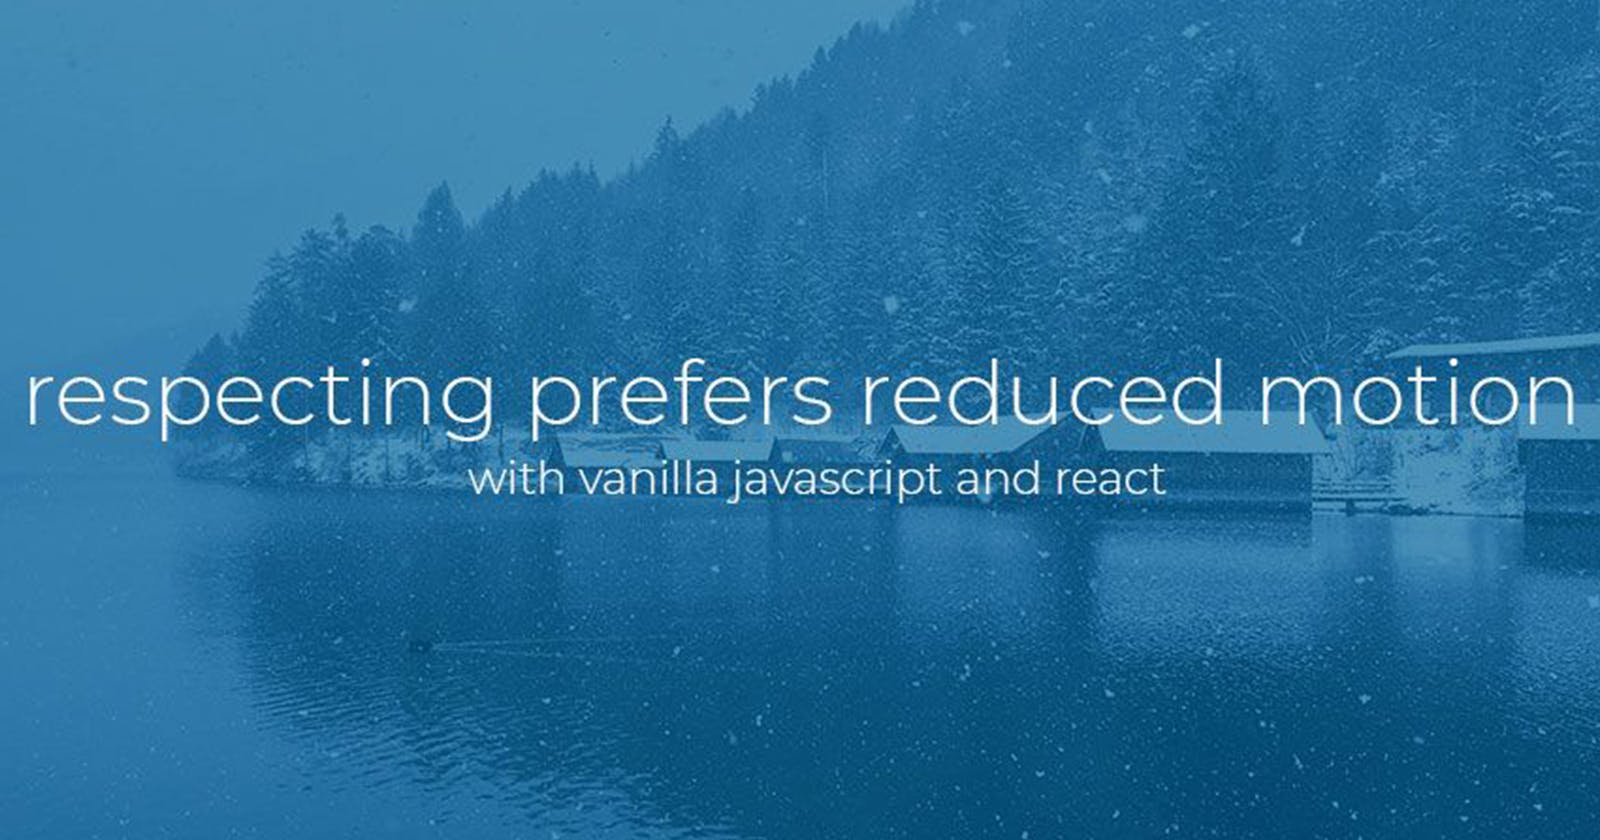 Respecting “prefers reduced motion” with Javascript and React.